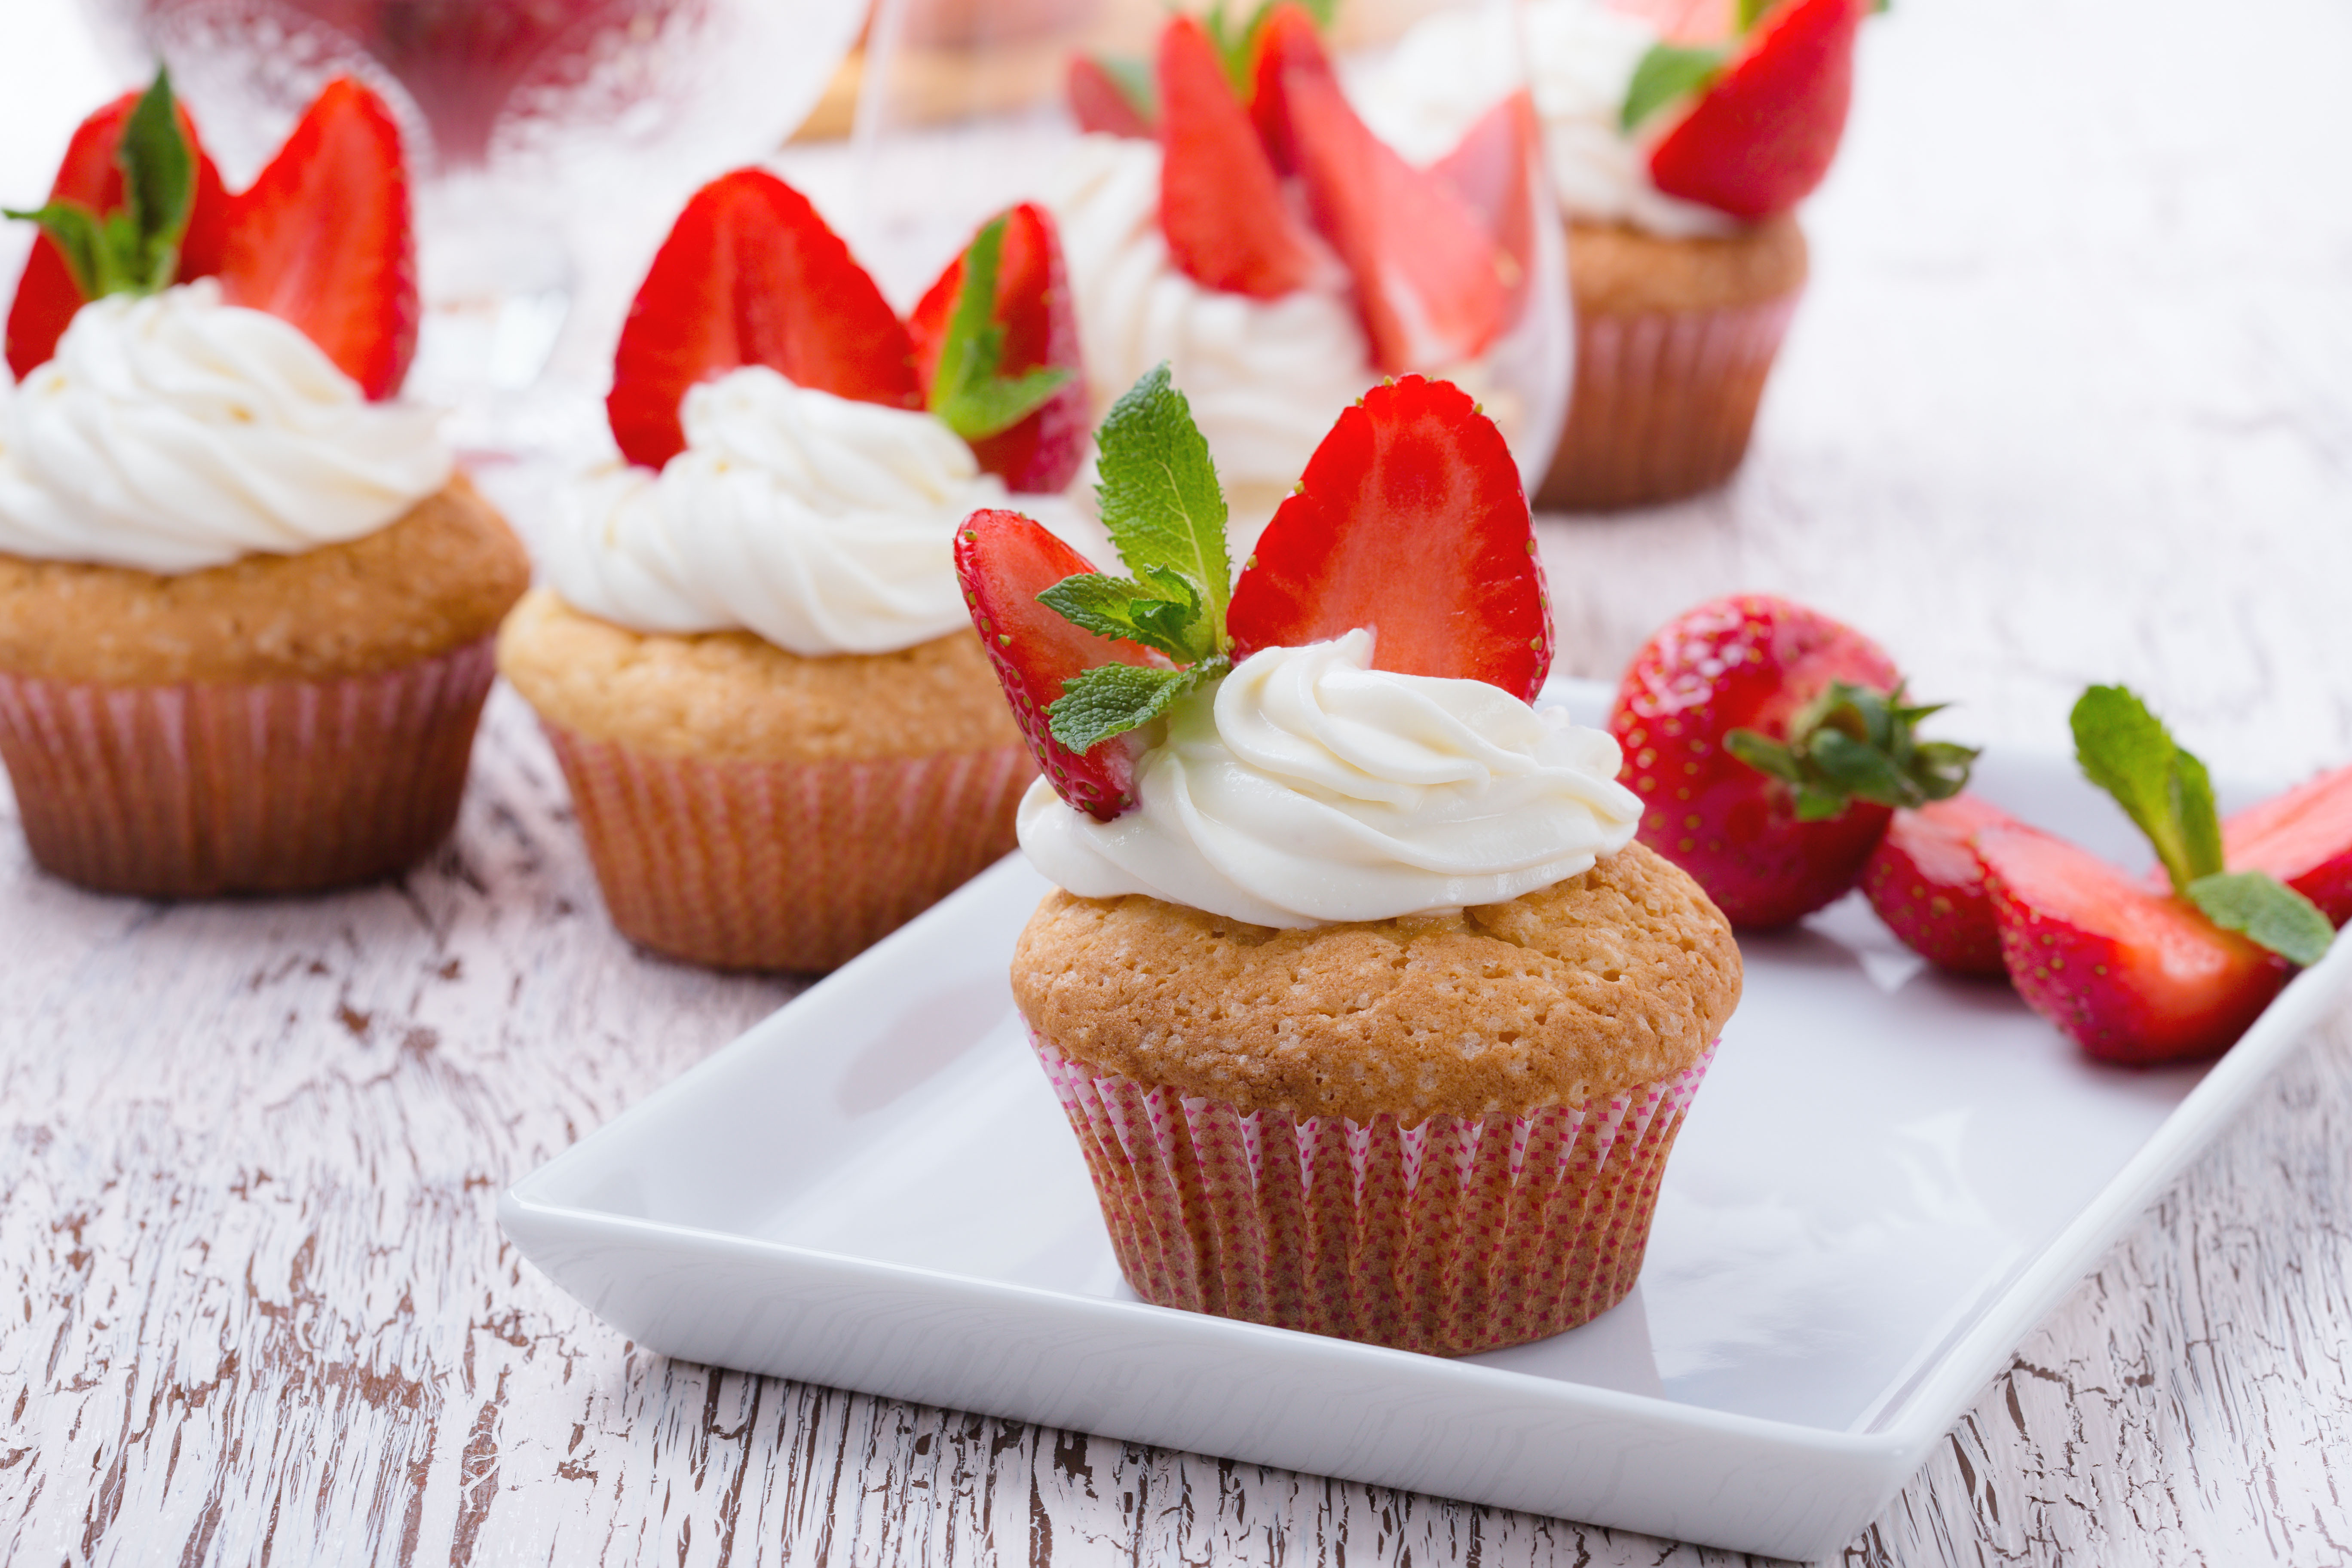 Strawberry Cheesecake Cupcakes - Delamere Dairy